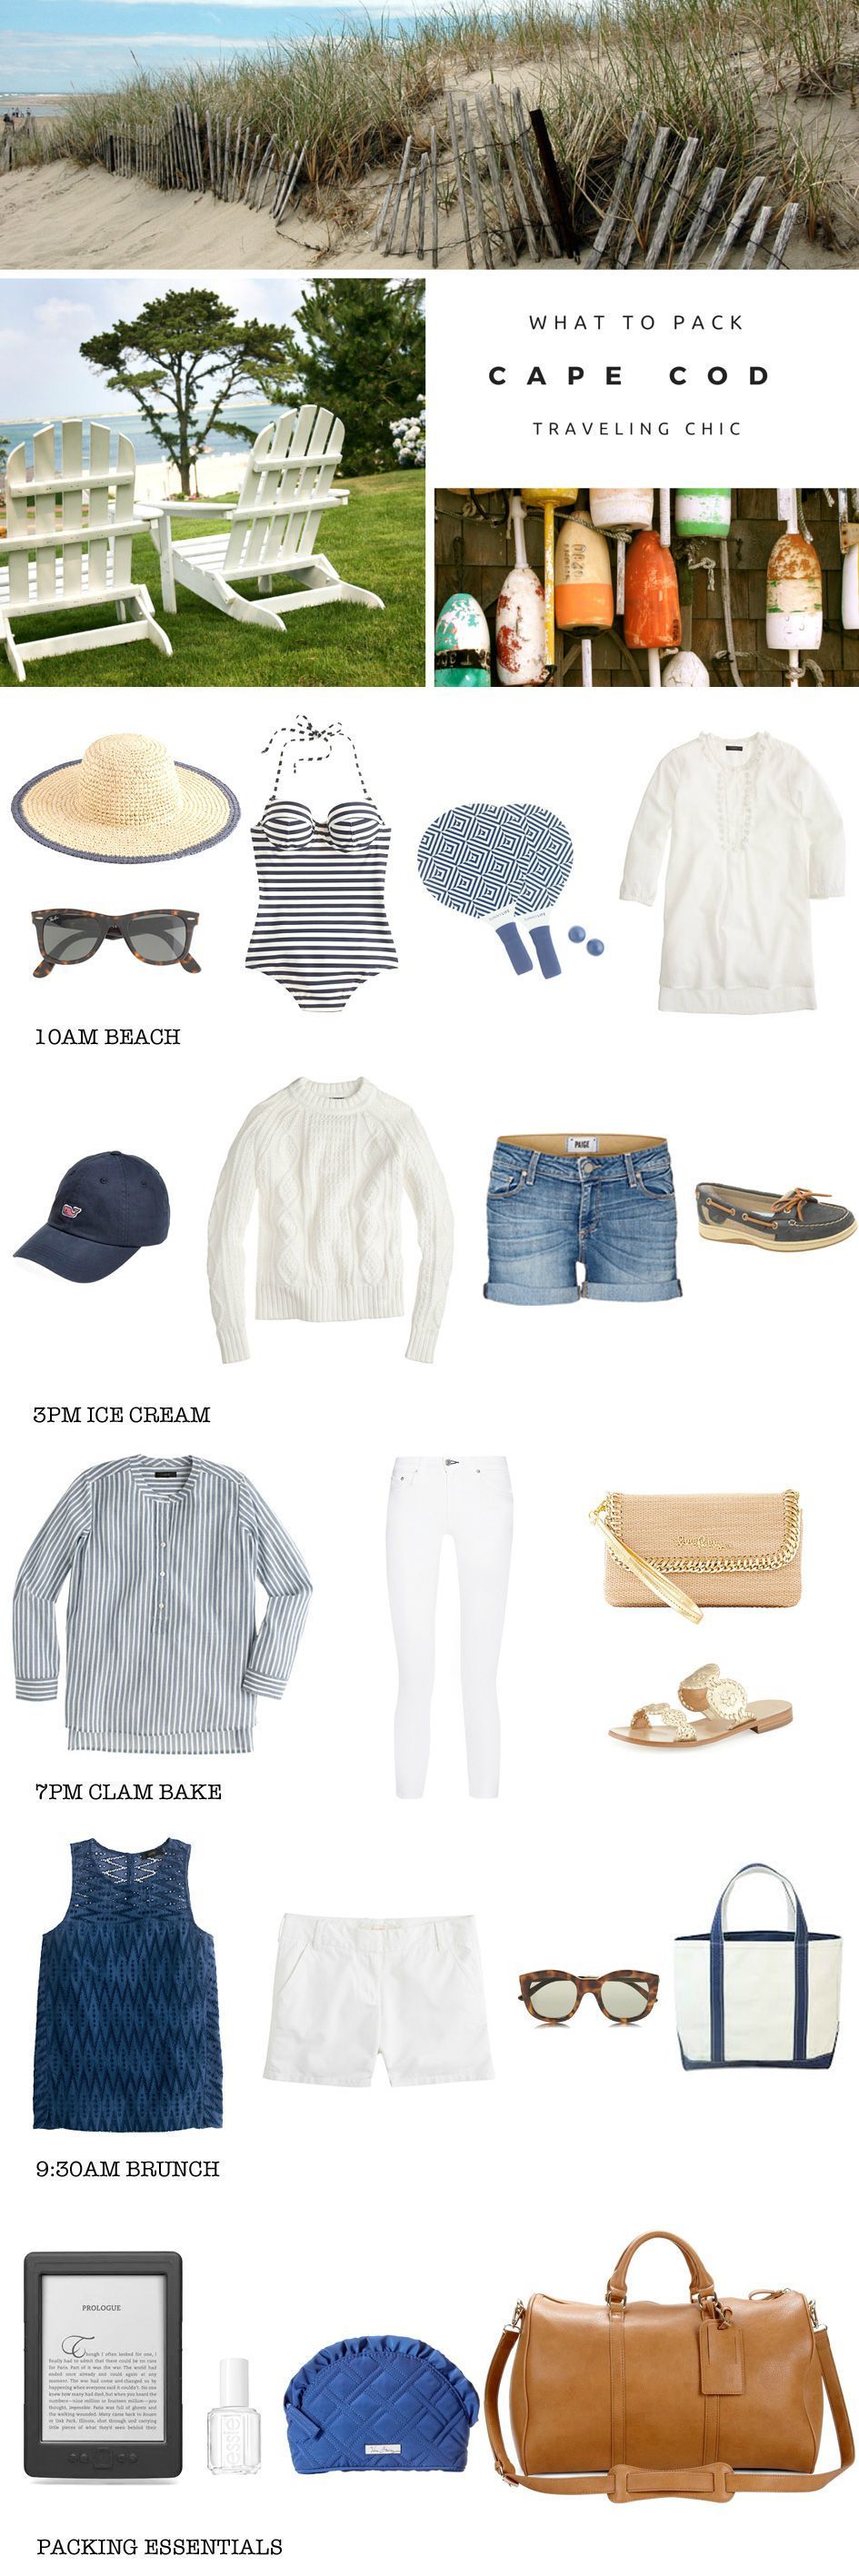 What to pack for a trip to Cape Cod, Massachusetts. The perfect packing list for a trip to New England and the beach. Covers